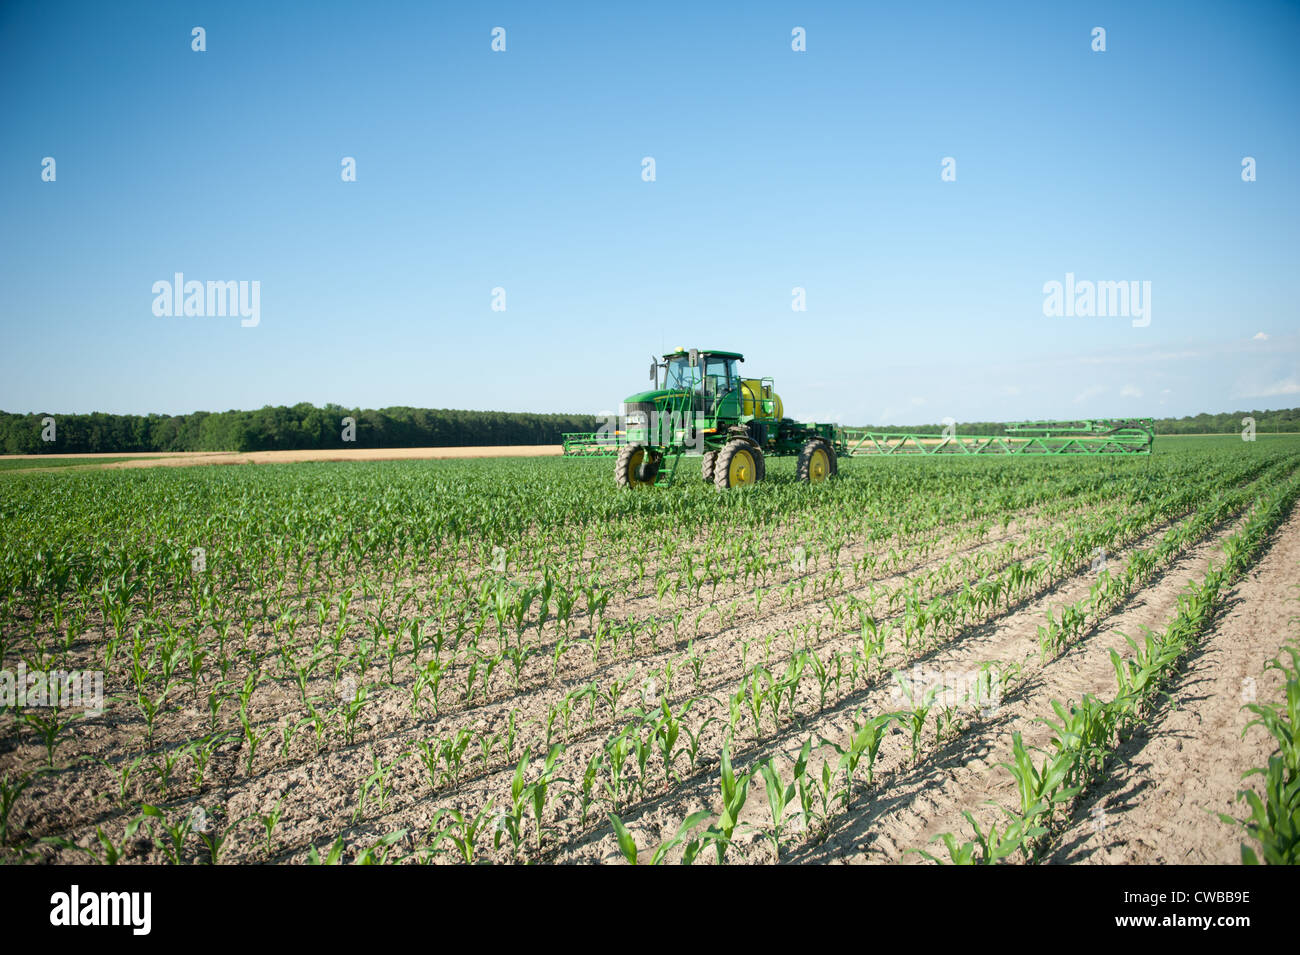 Tractor plowing through field of farm  Stock Photo